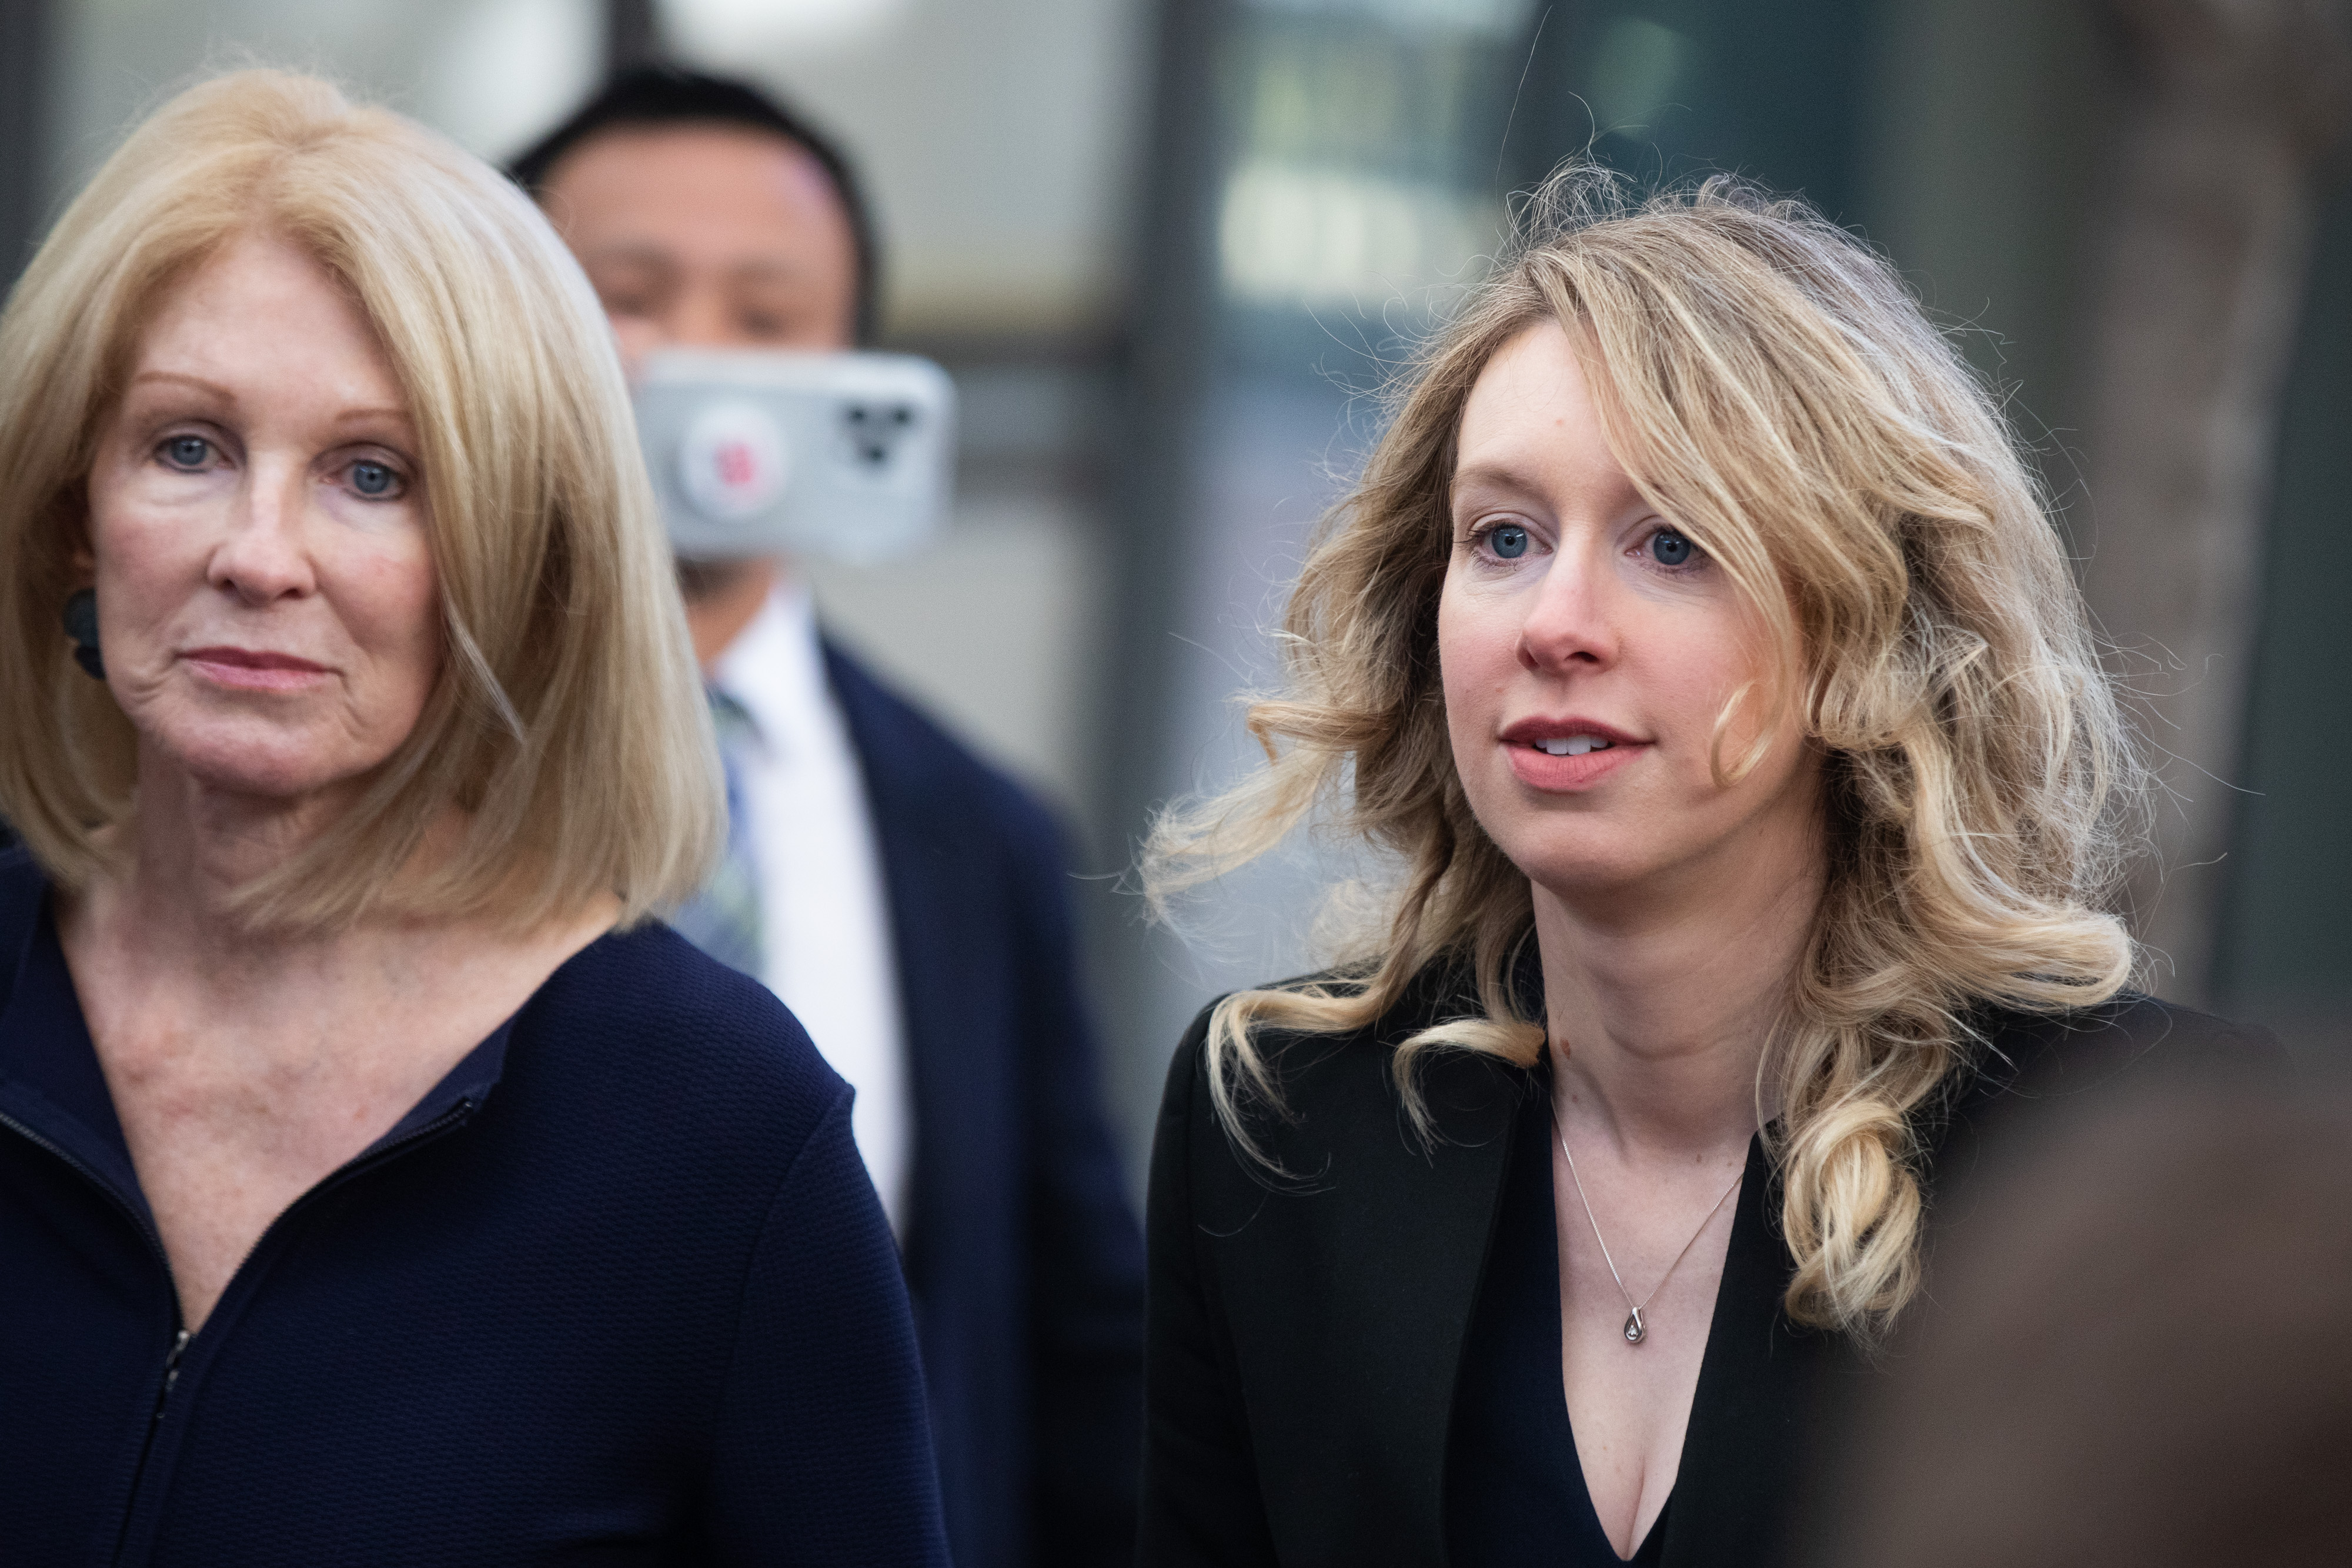 Elizabeth Holmes, founder of Theranos Inc., arrives at federal court with her mother Noel Holmes, left, in San Jose, California, US, on Friday, March 17, 2023. | Source: Getty Images